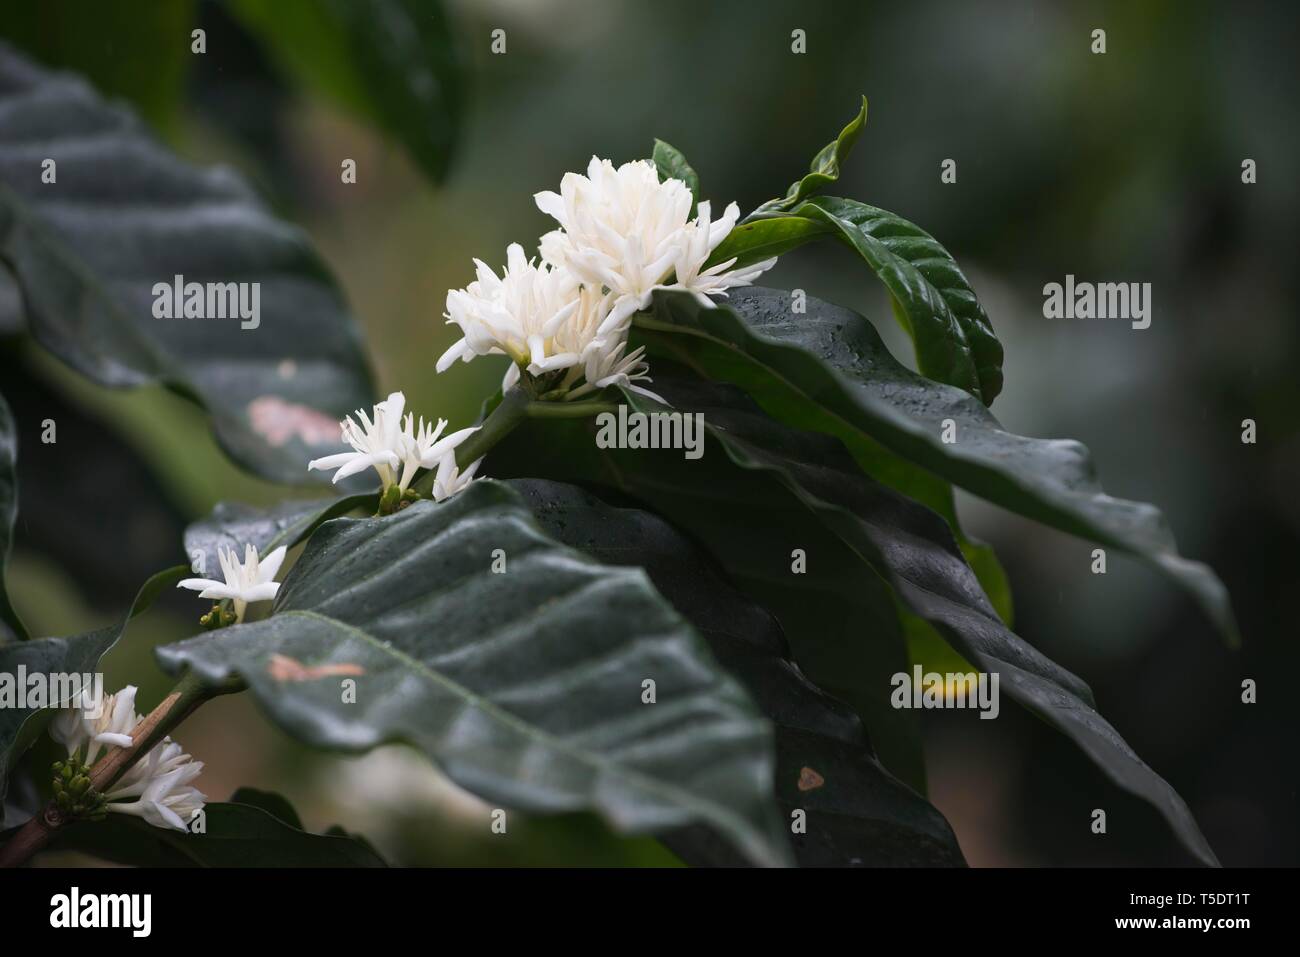 Branch with white flowers of the coffee plant (Coffea arabica), Parque Guanayara, Cuba Stock Photo